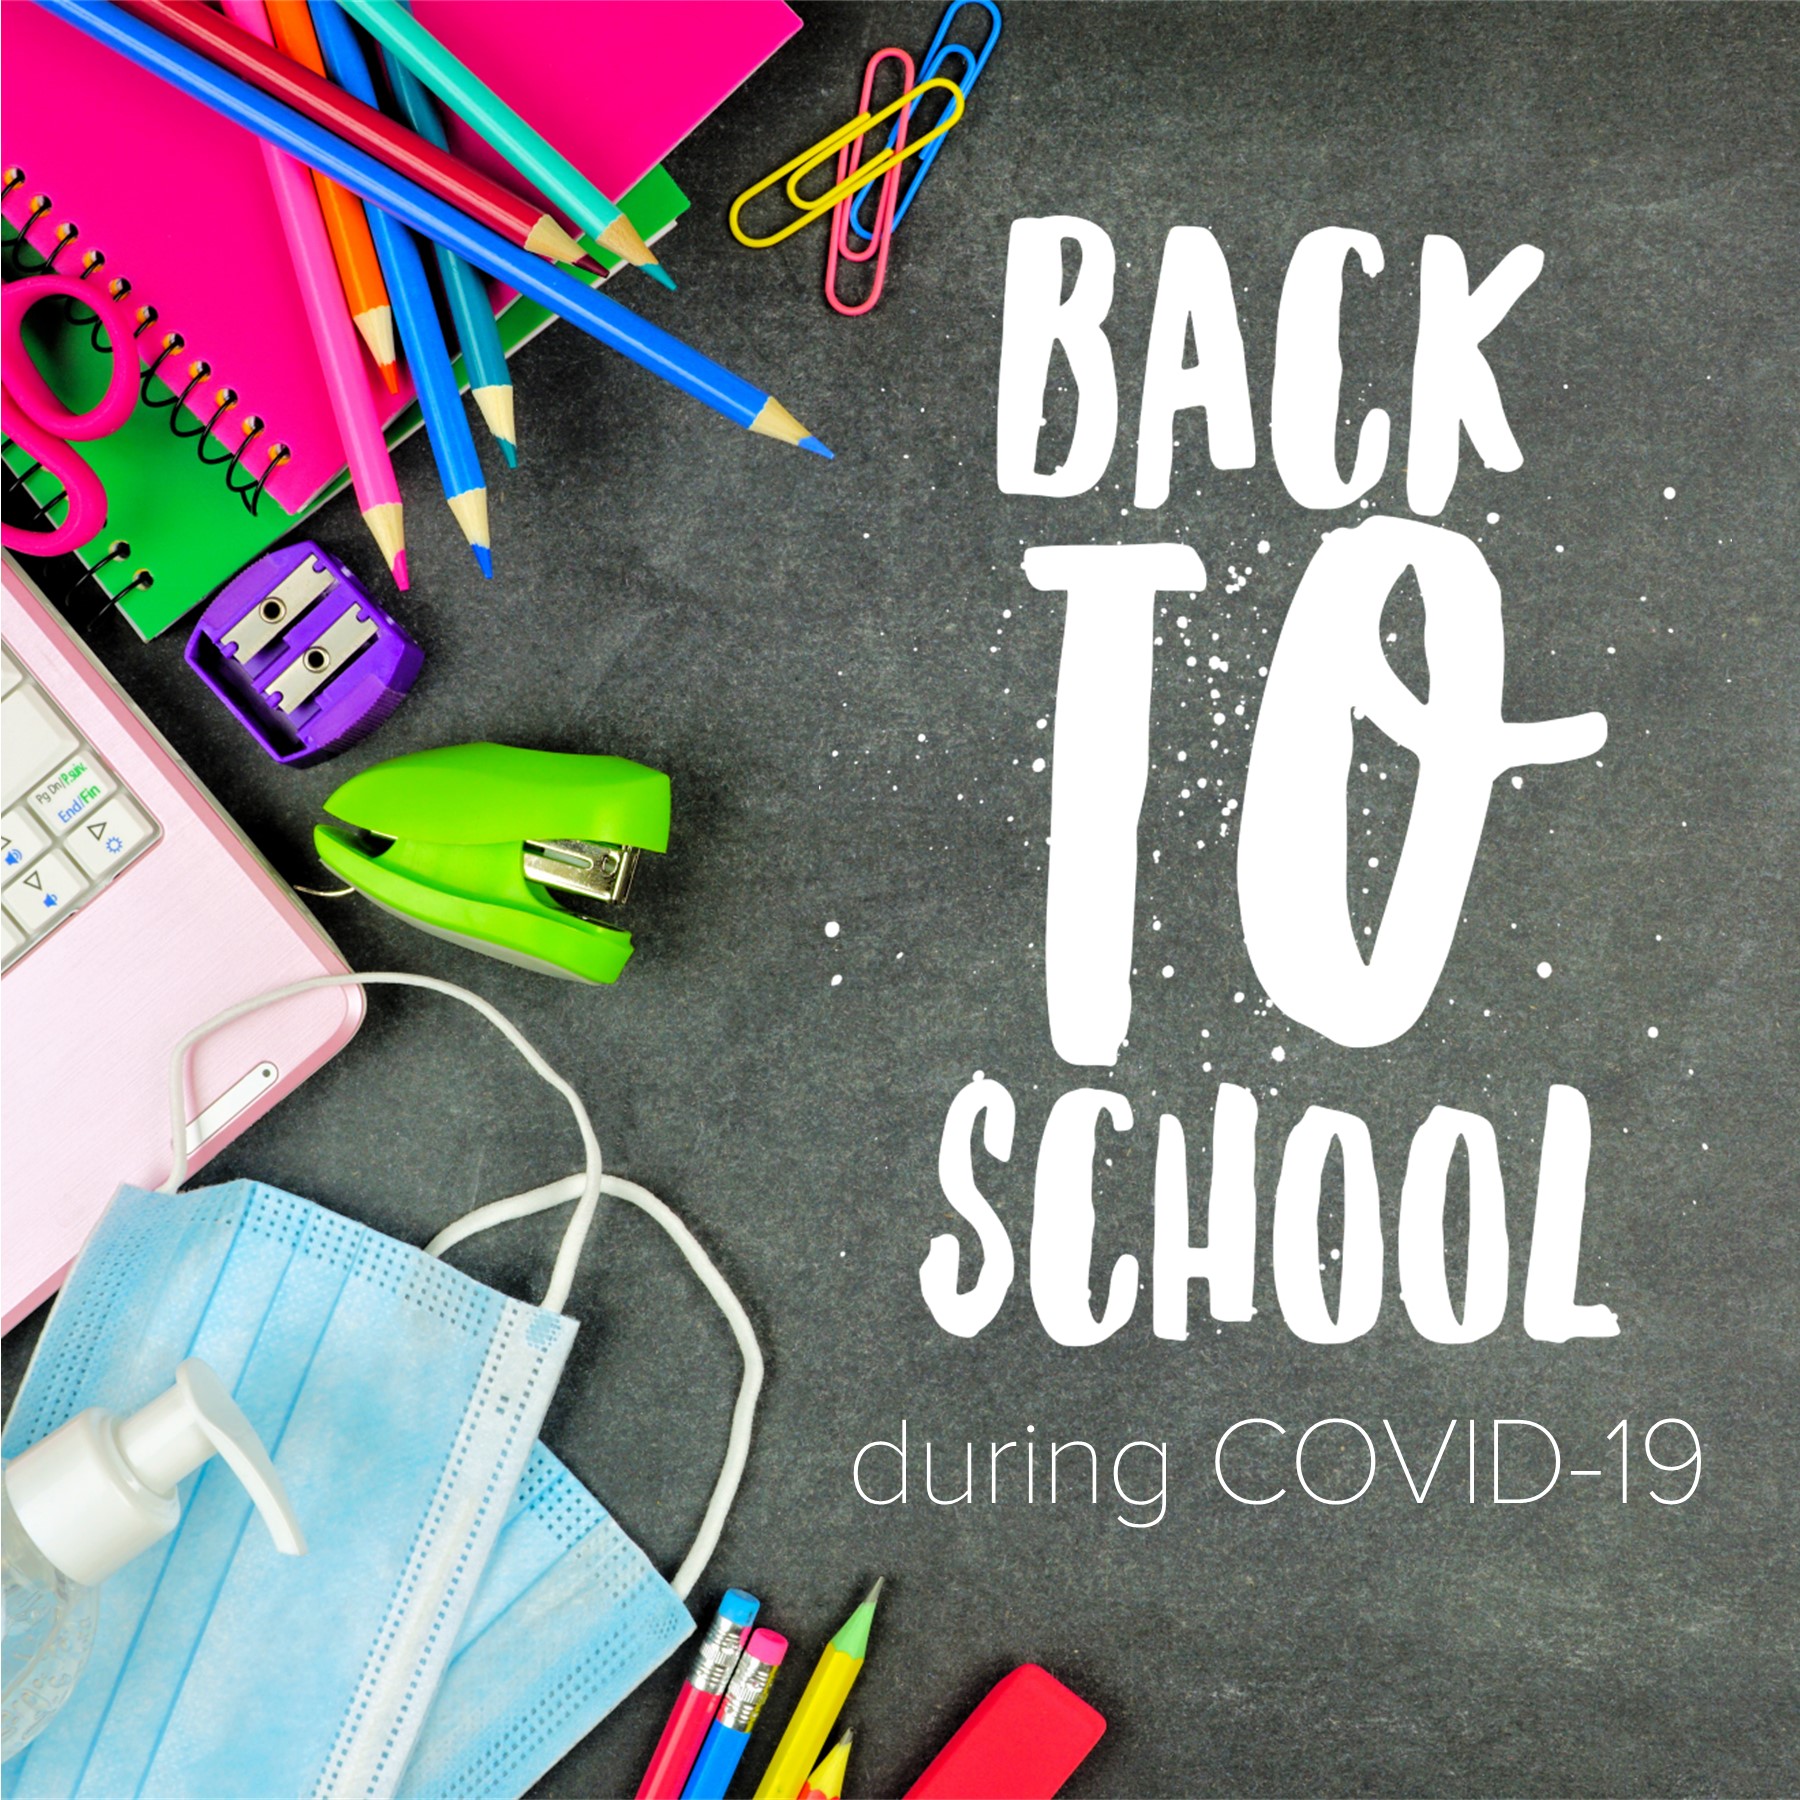 Back to school during COVID-19